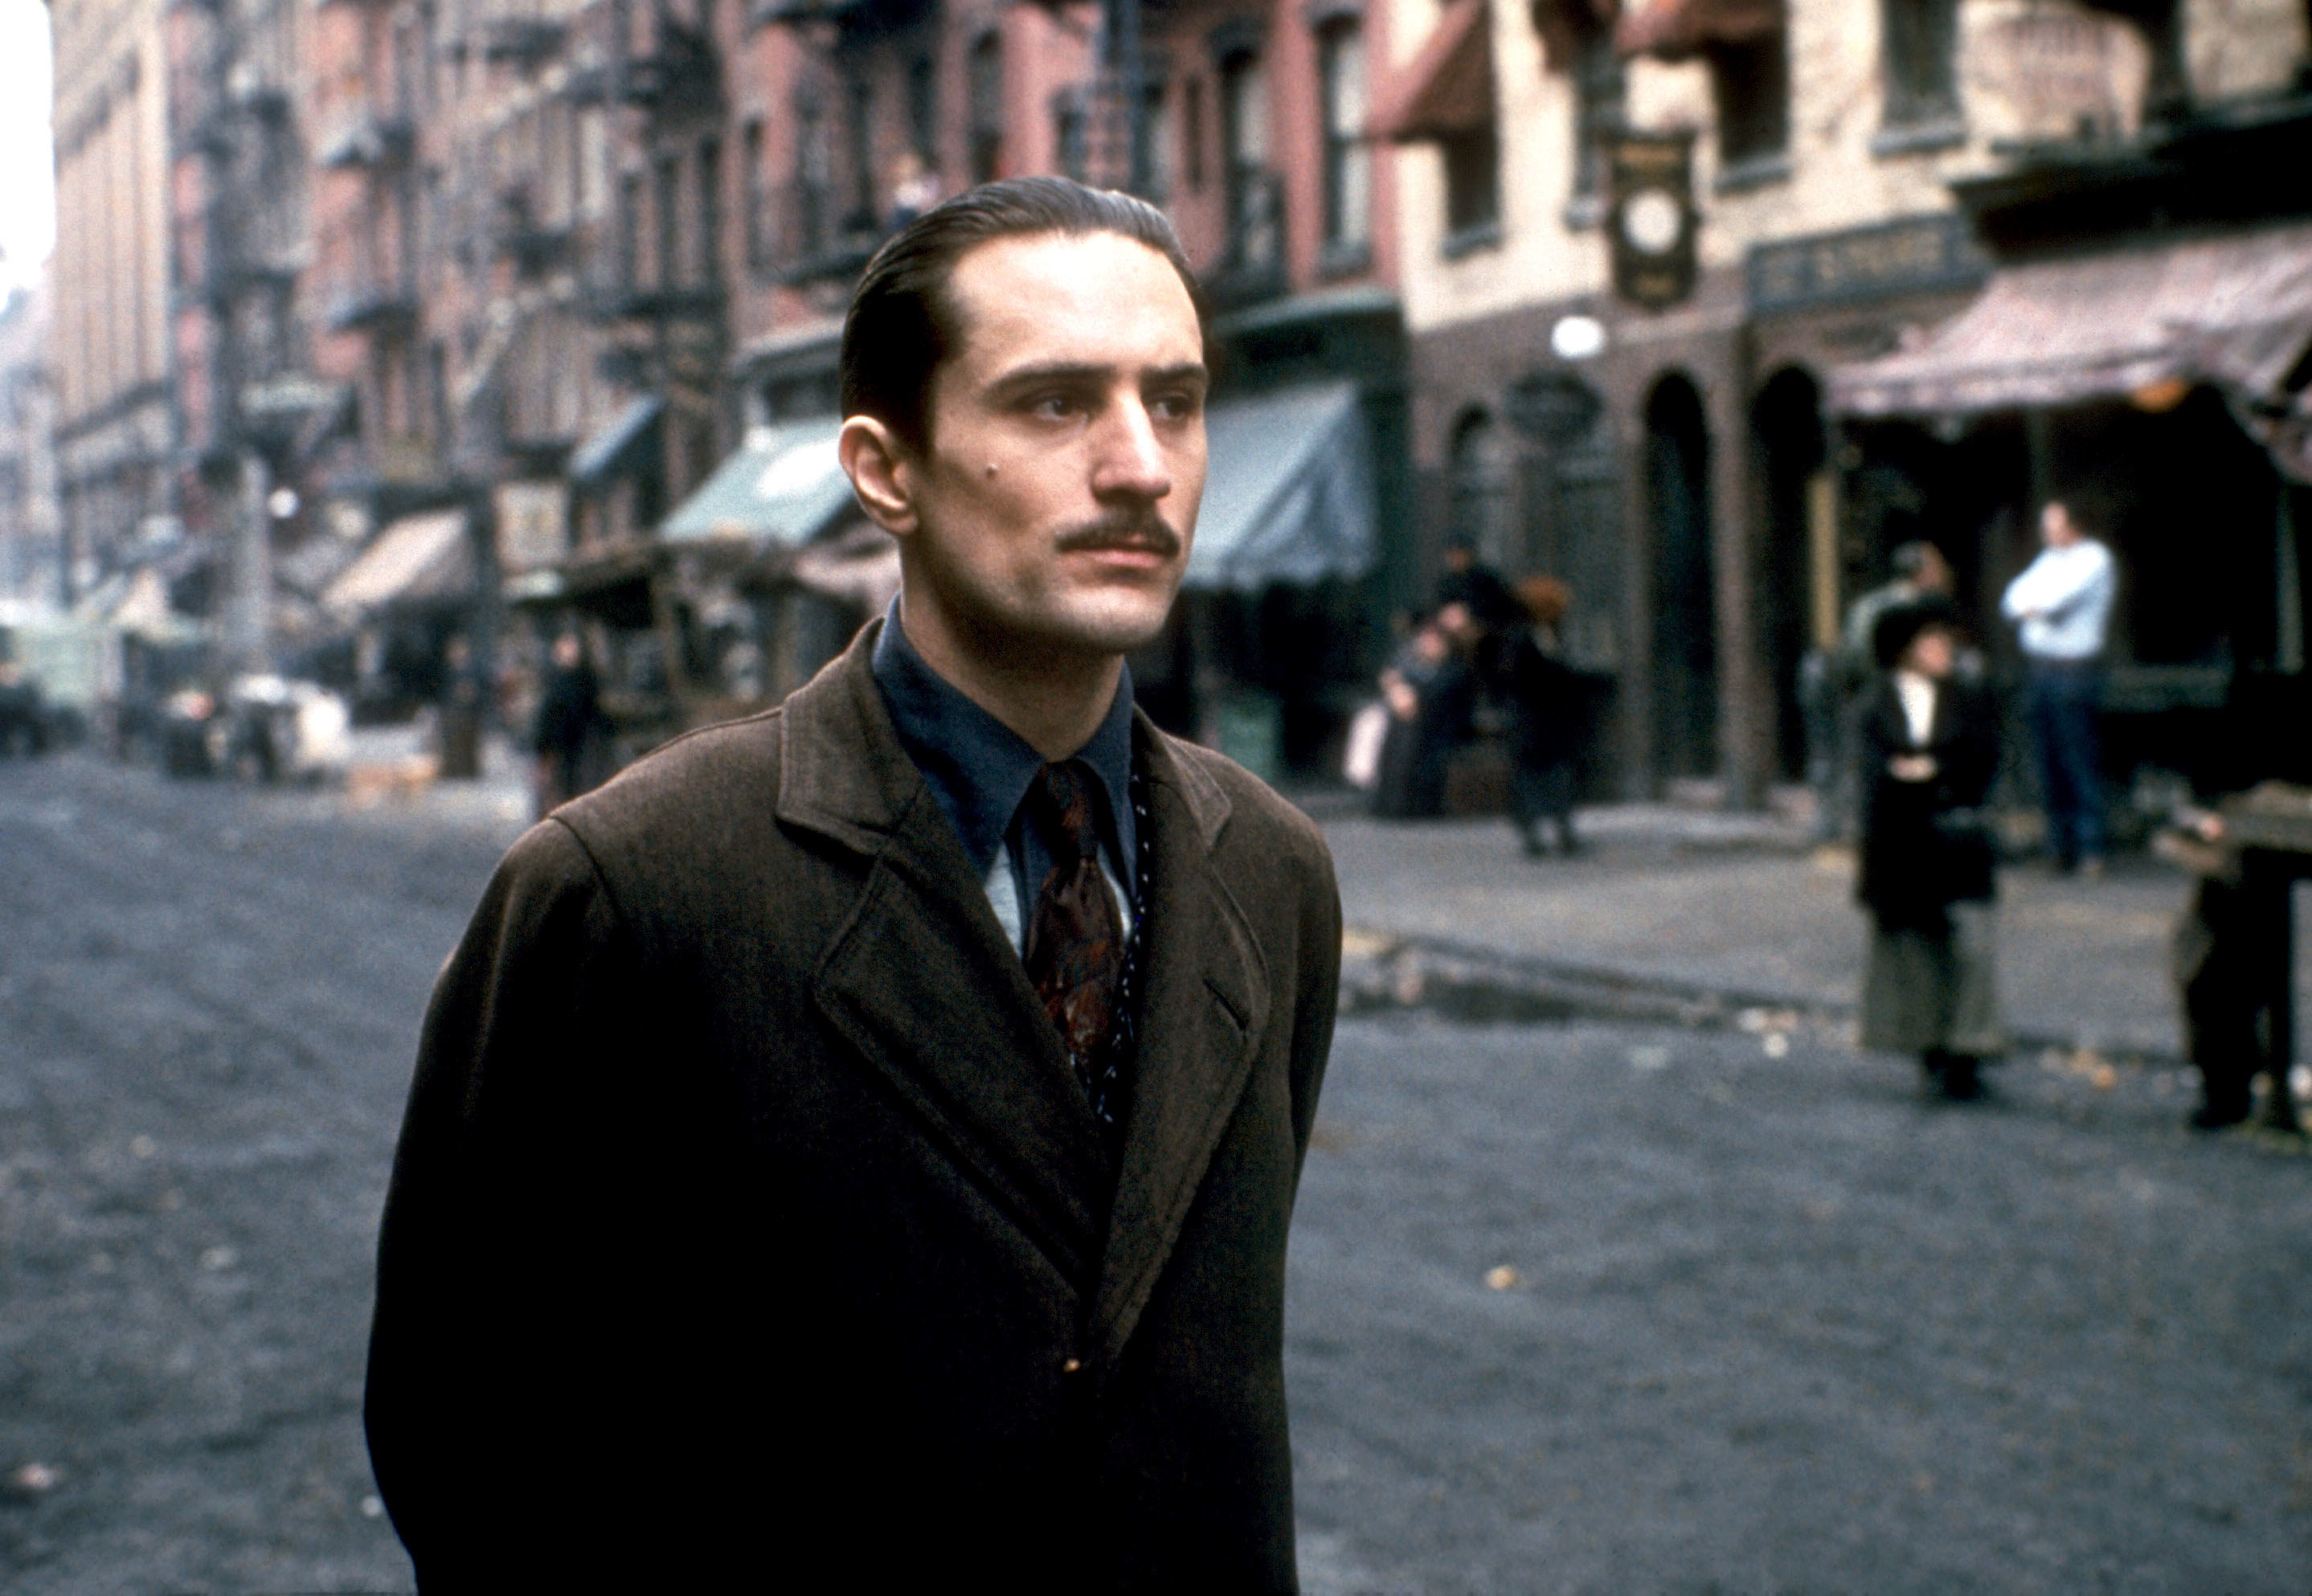 Robert on the streets of Little Italy with a thin mustache